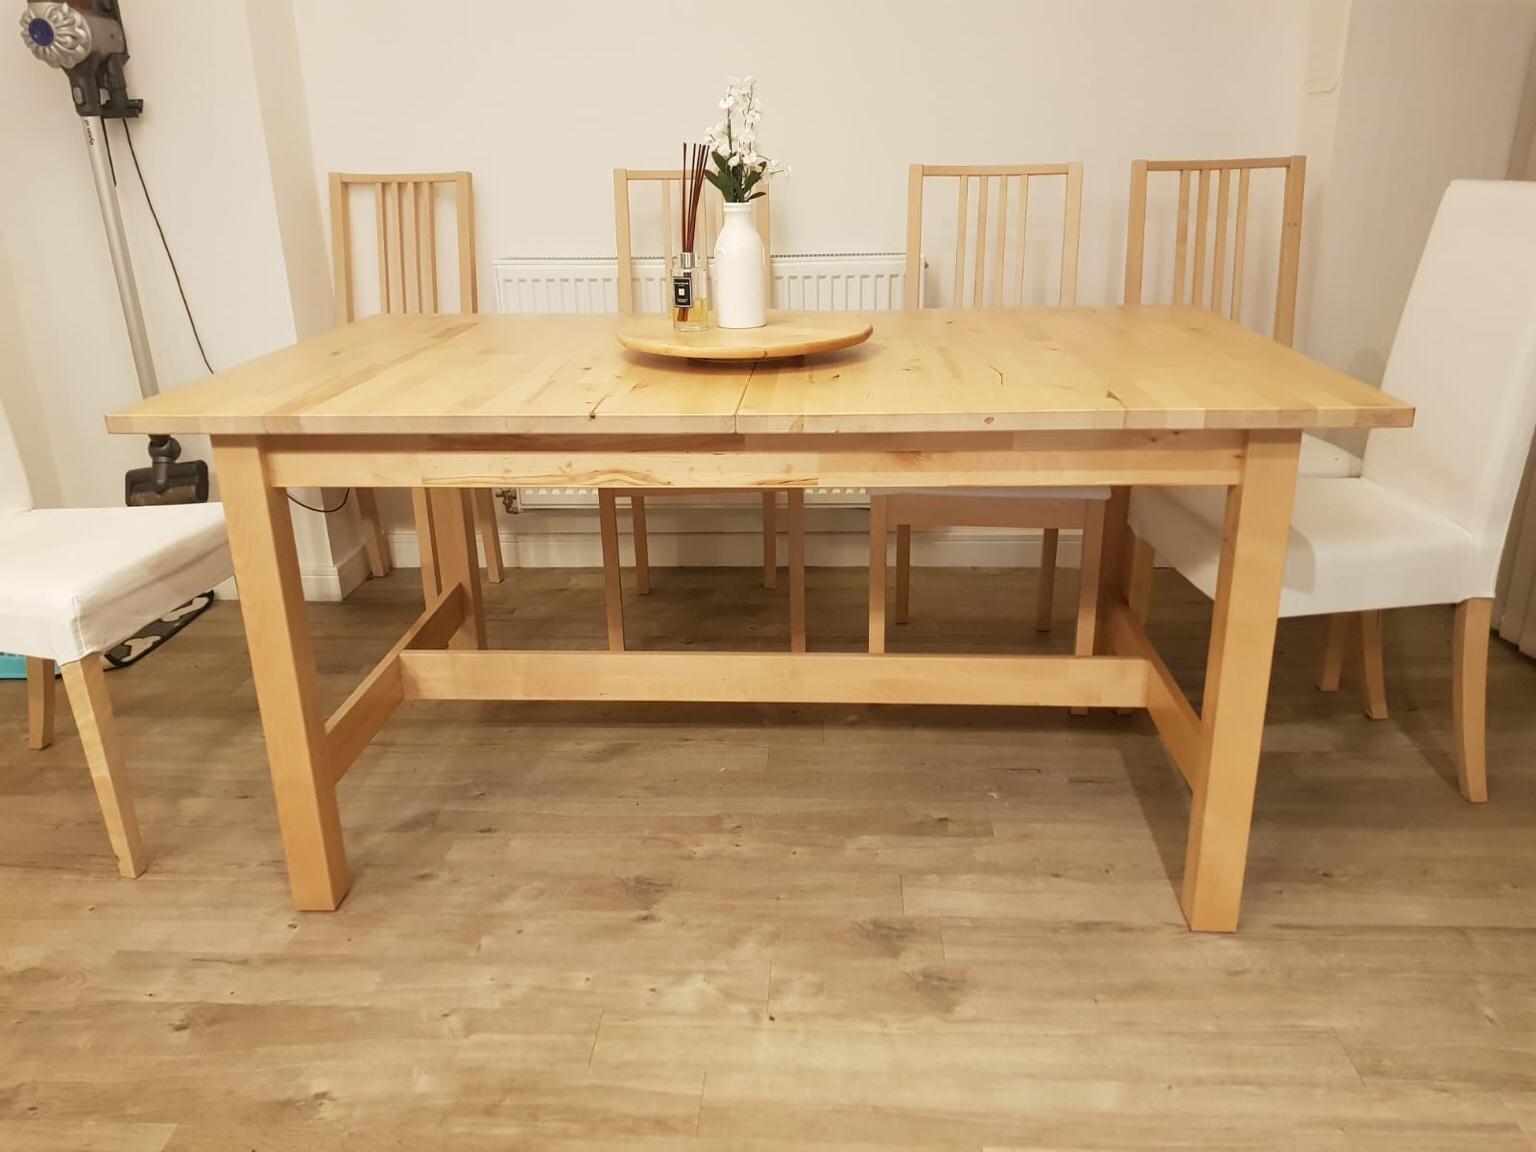 IKEA Norden Extendable dining table in Tonbridge and Malling for £100.